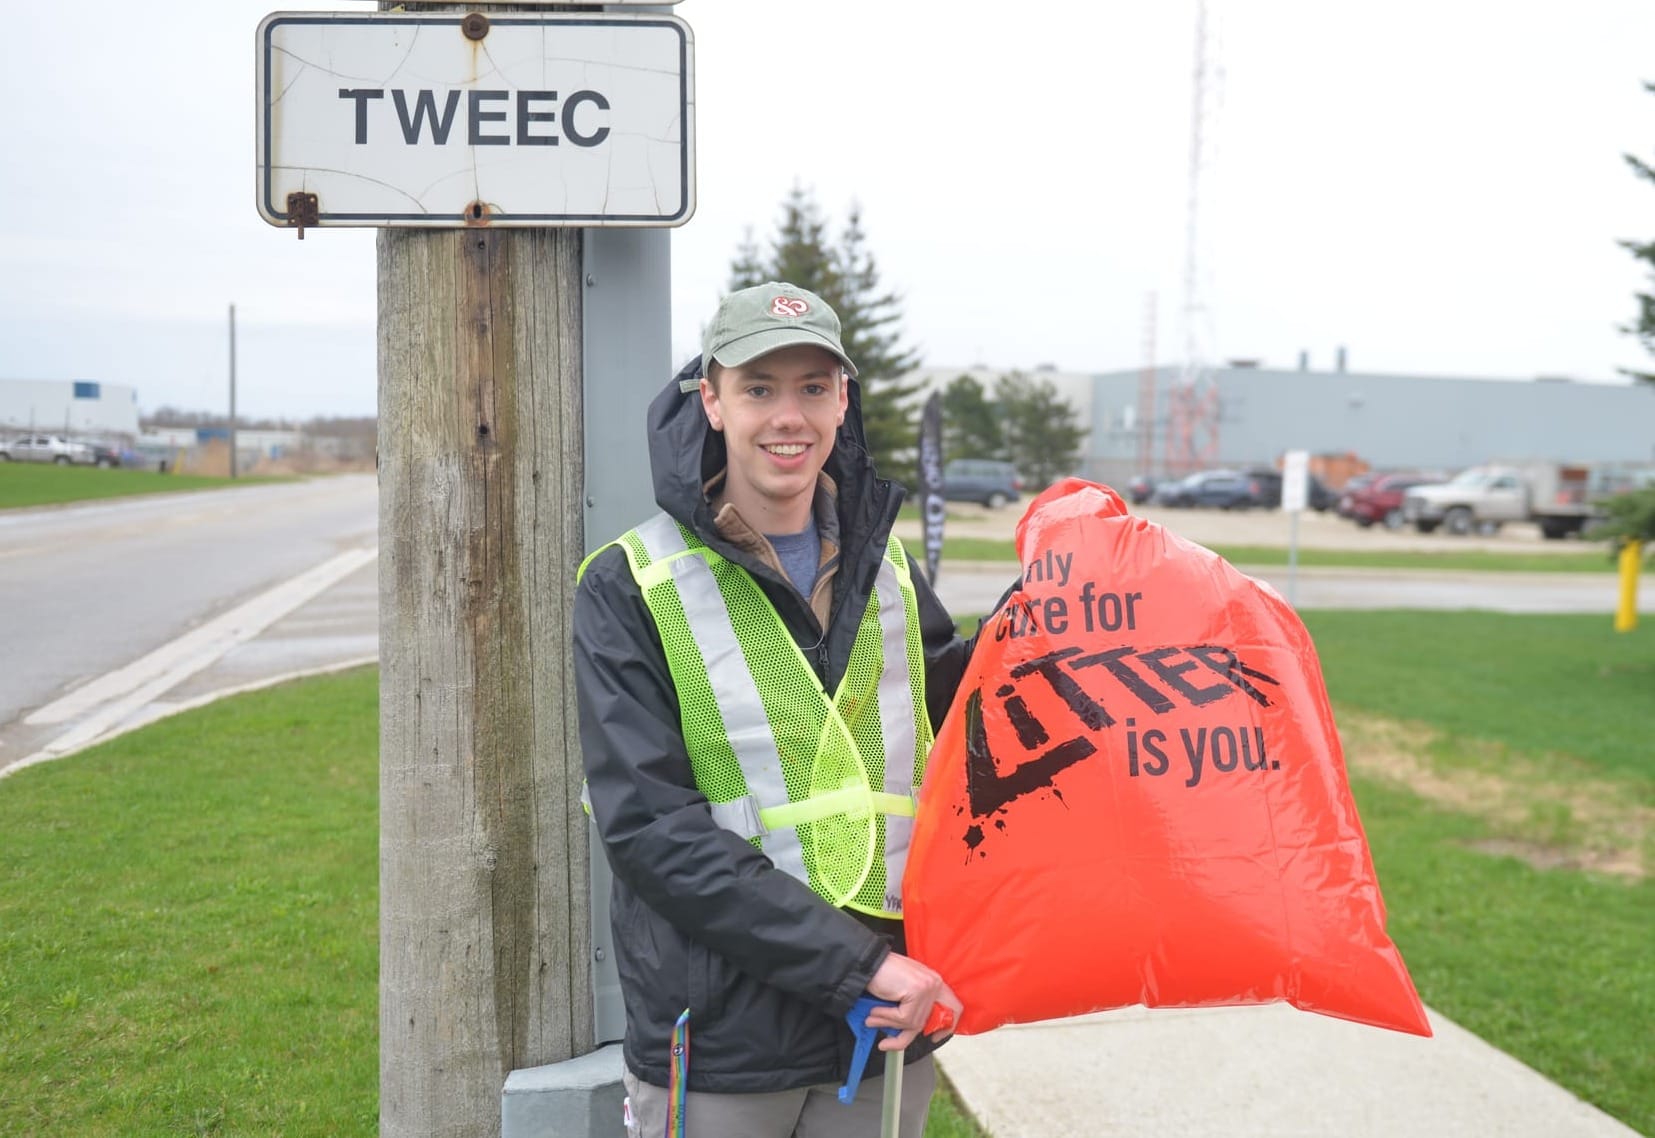 Earth Day prompts calls for public help with TWEEC cleanup activities